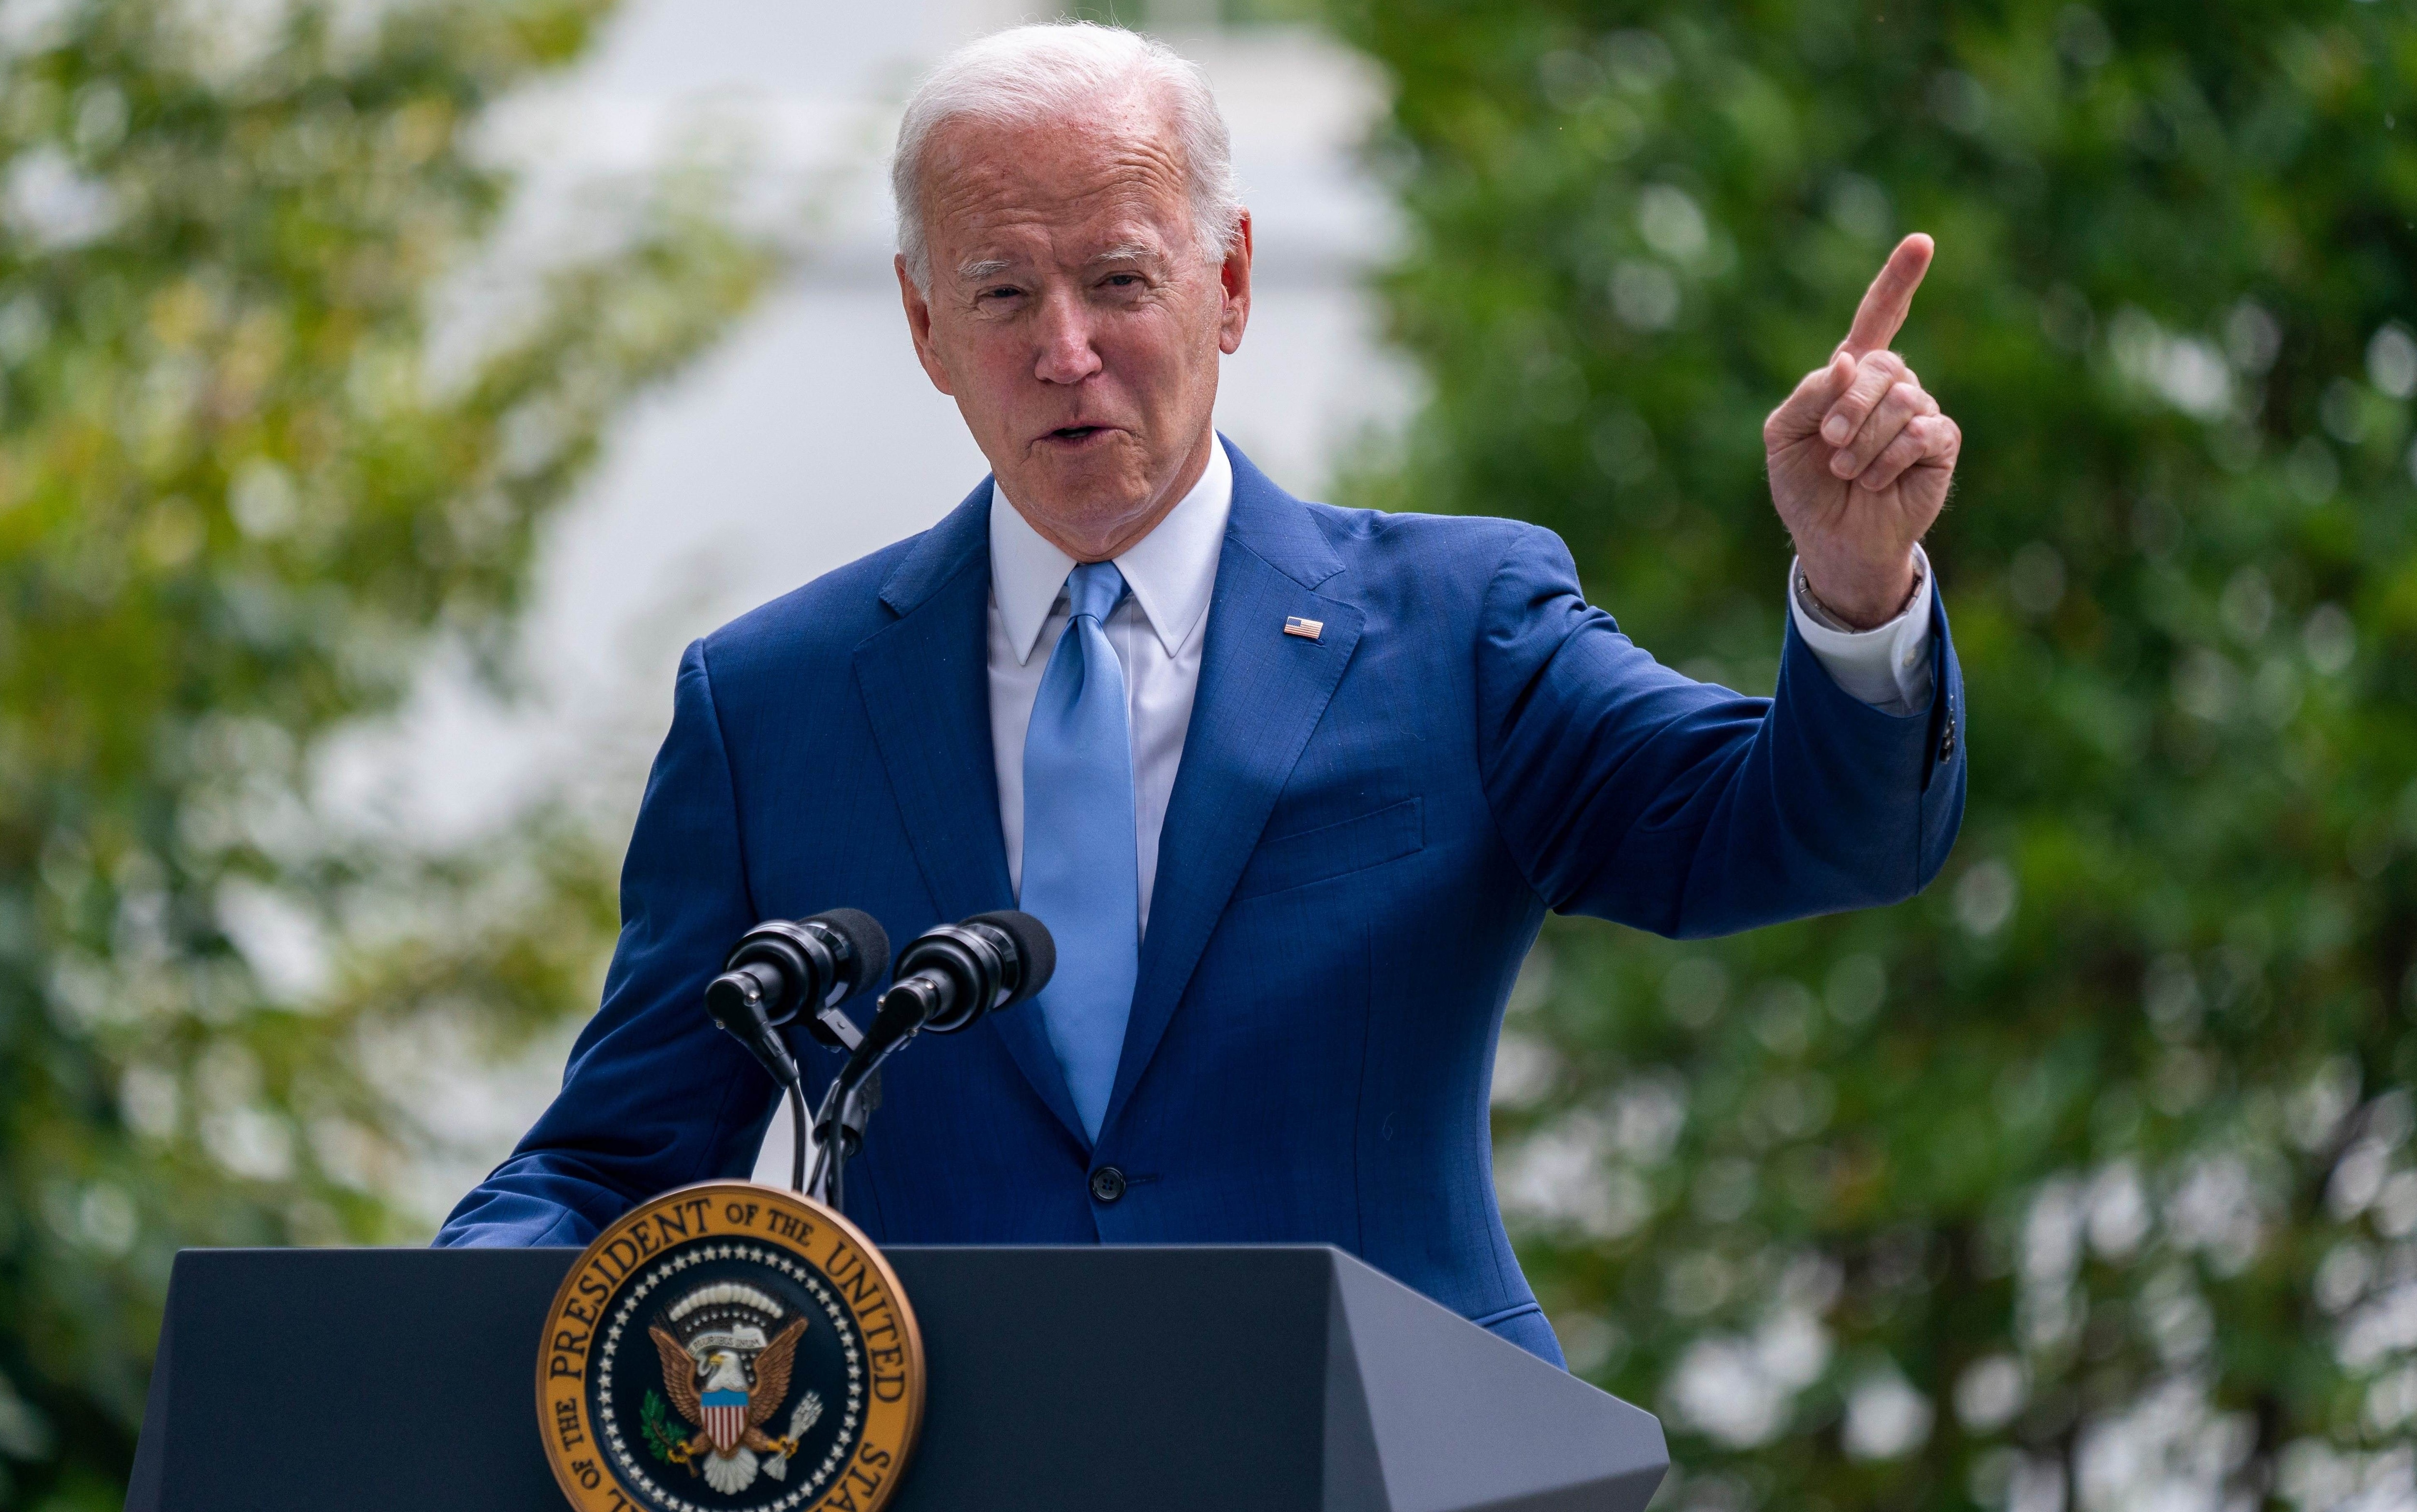 Biden calls a summit on democracy in the US, excluding China